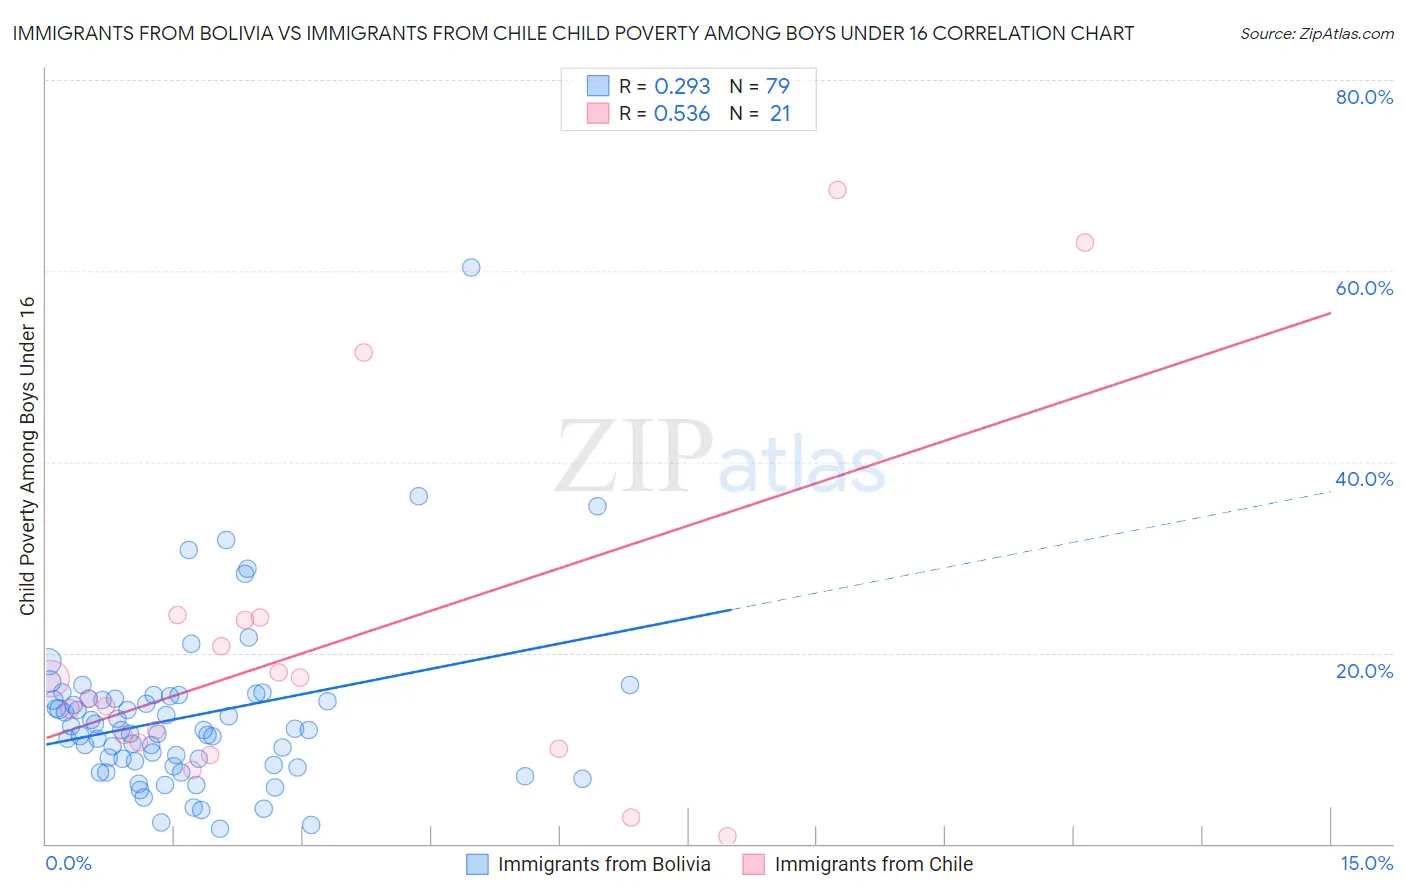 Immigrants from Bolivia vs Immigrants from Chile Child Poverty Among Boys Under 16